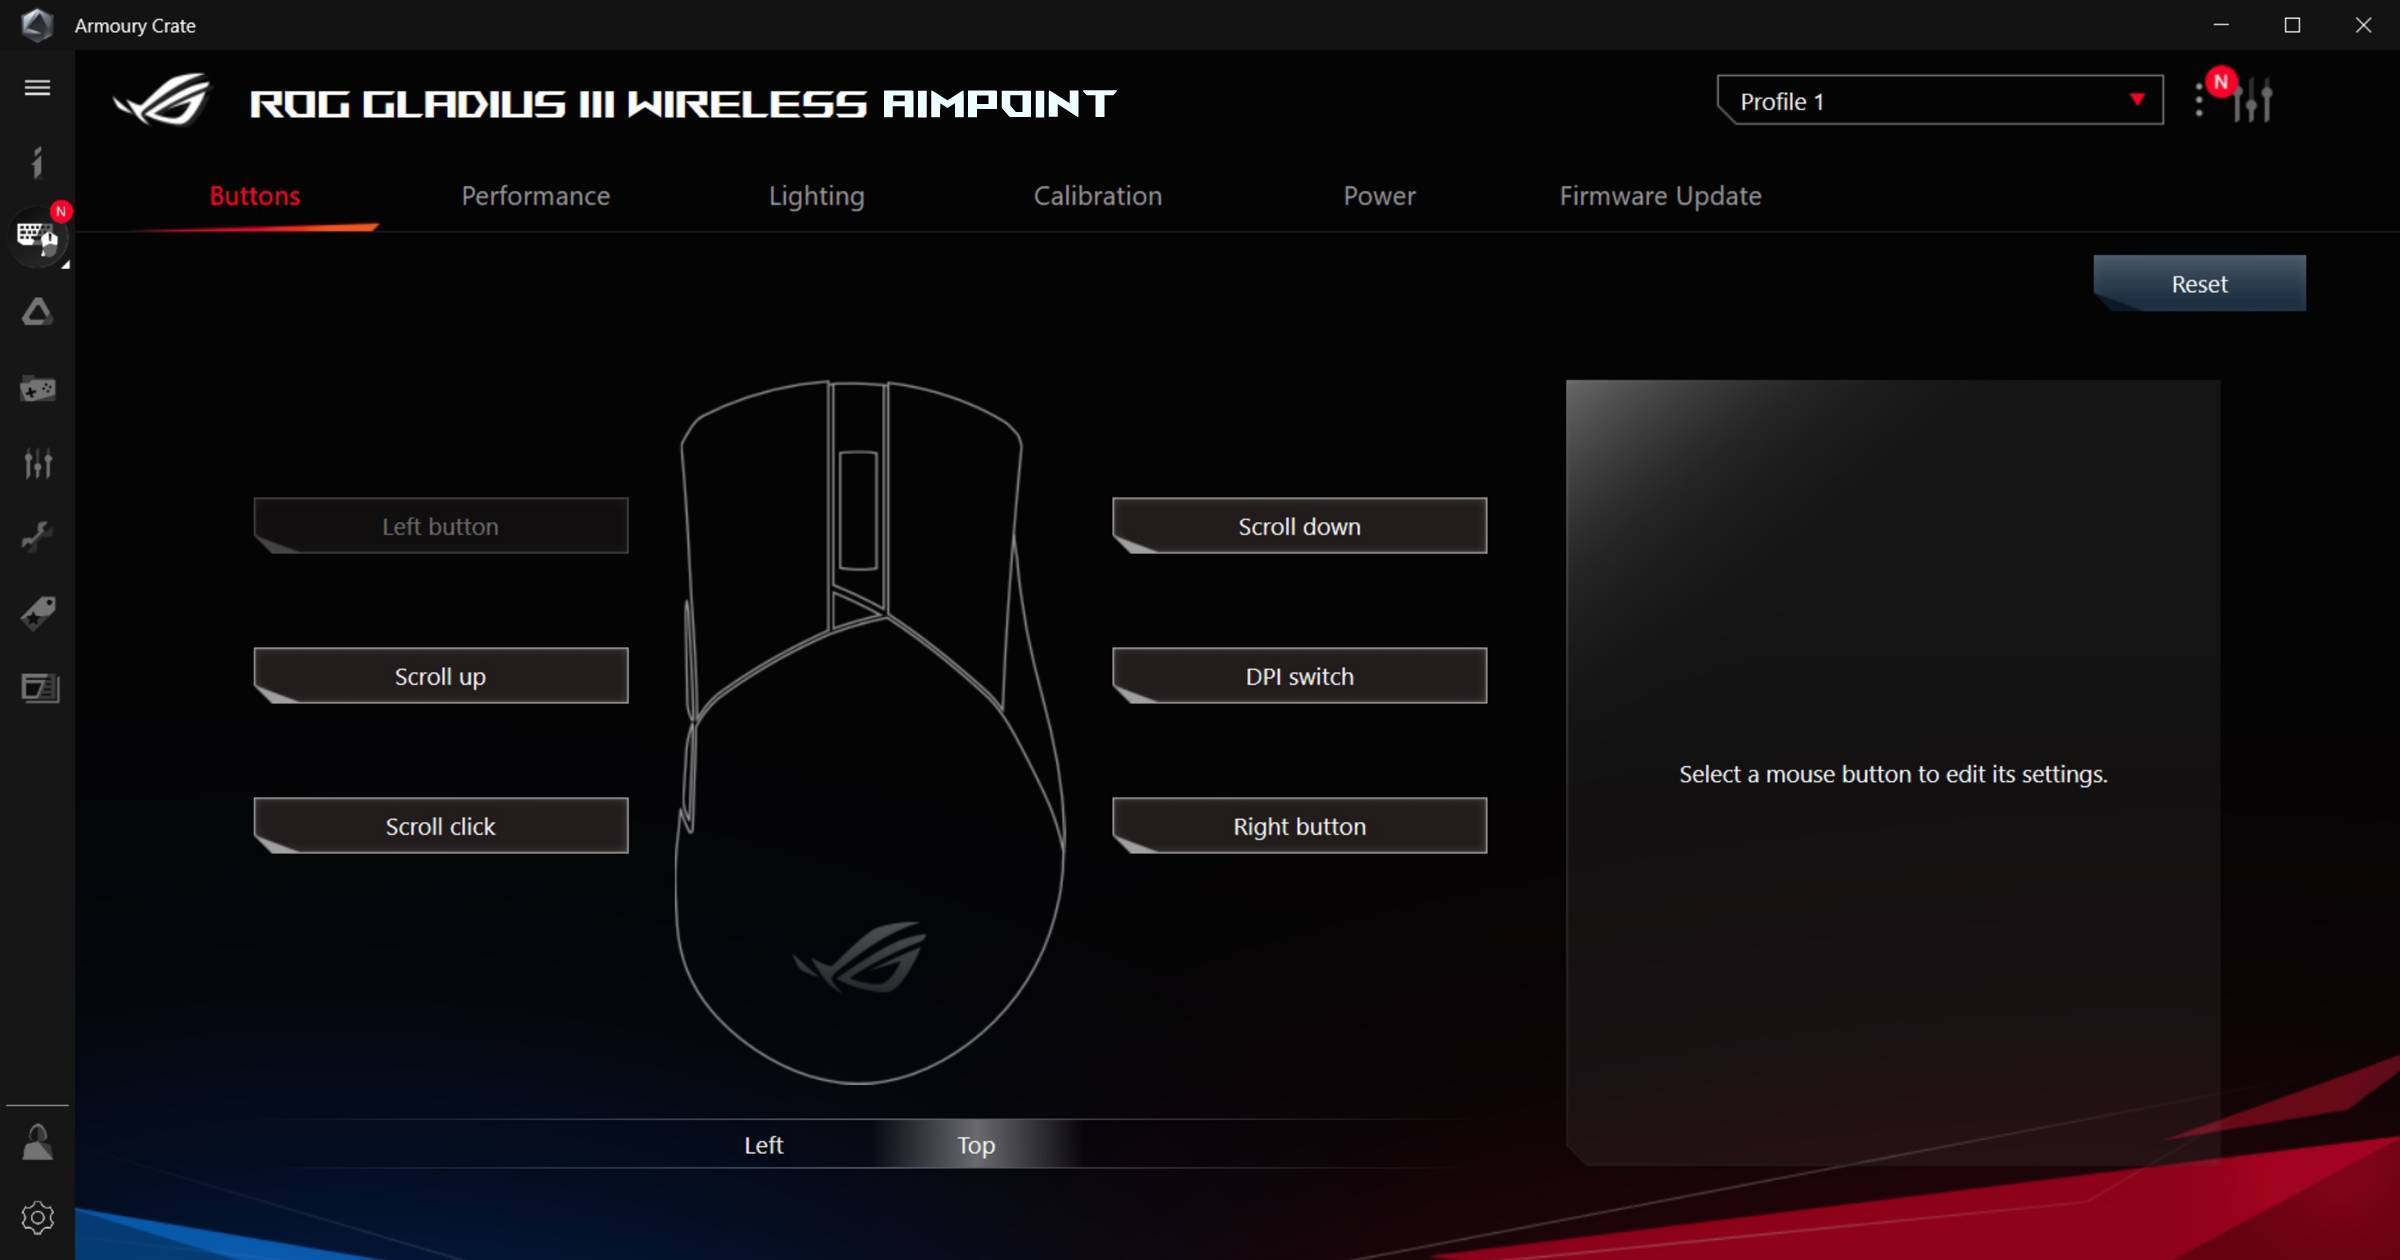 ASUS ROG Gladius III Wireless AimPoint ASUS Armoury Crate